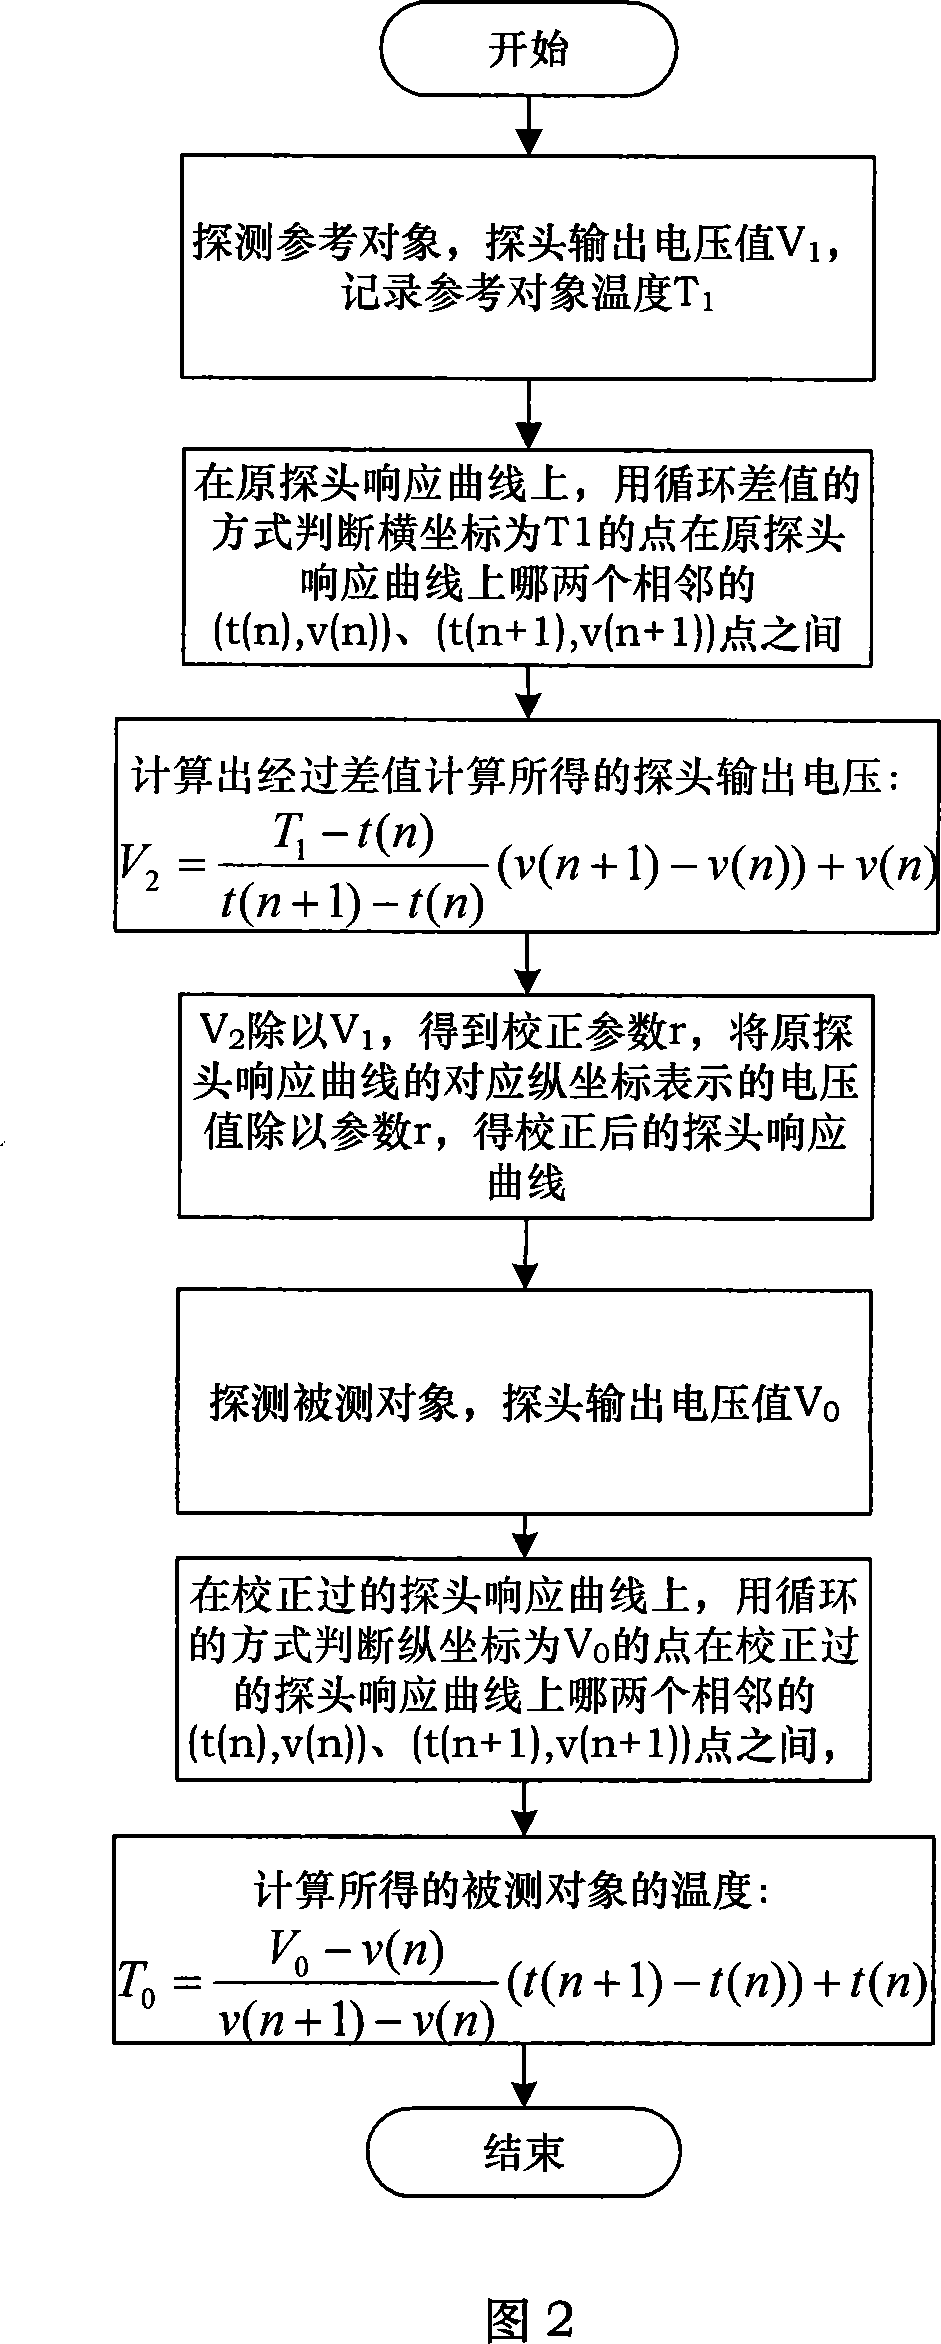 System calibrating method for improving measurement accuracy